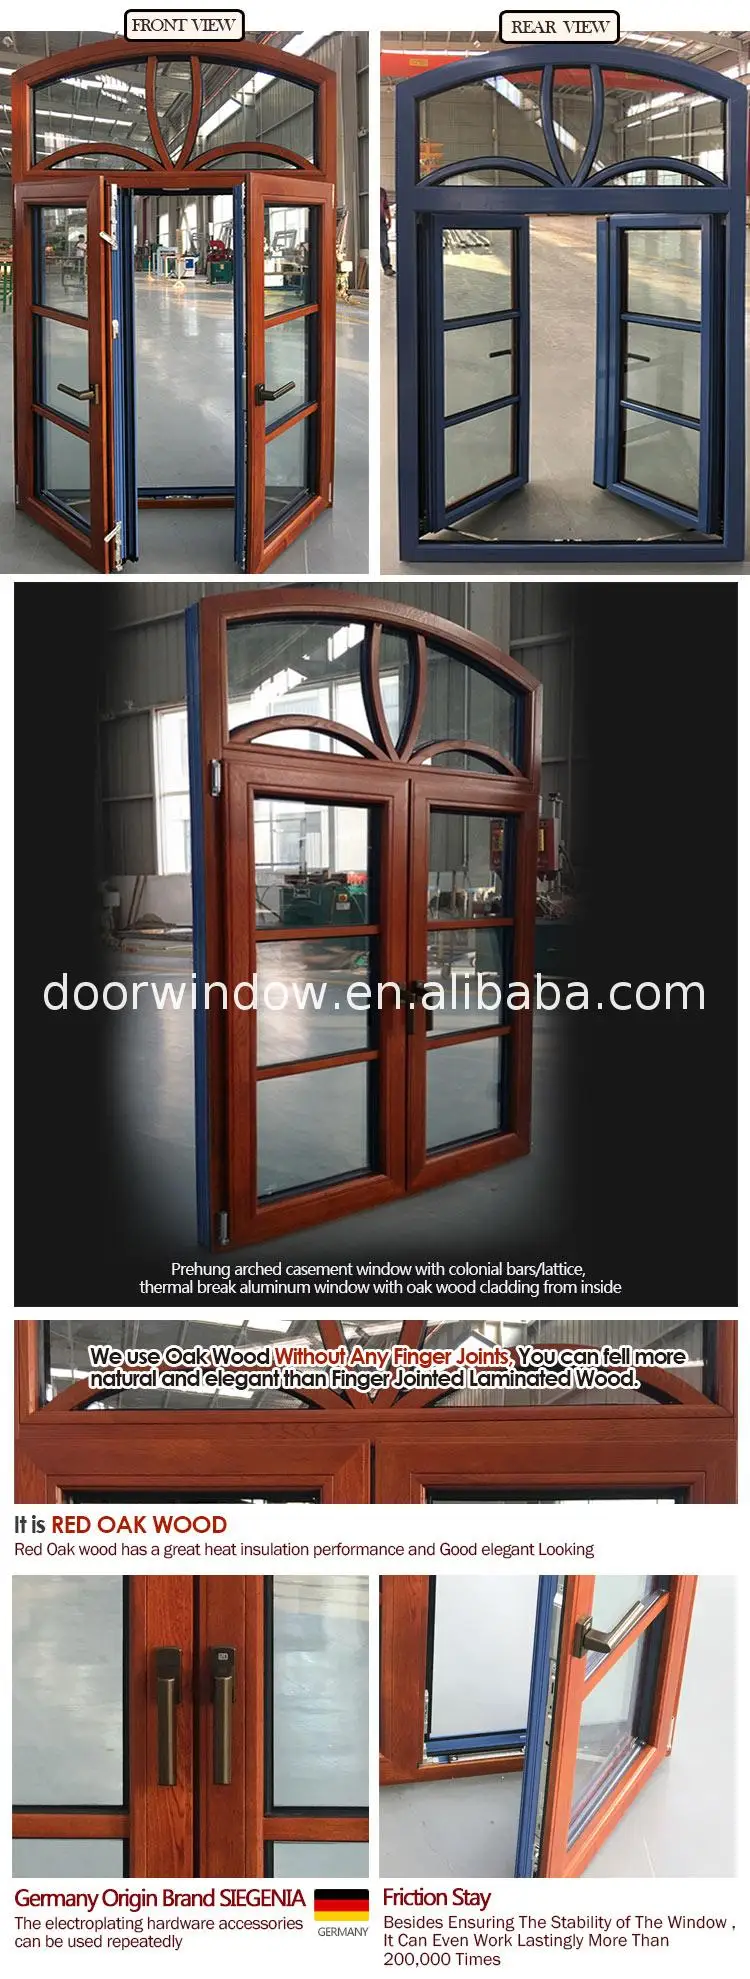 China Good doorwin arched windows detachable window grilles curtains french